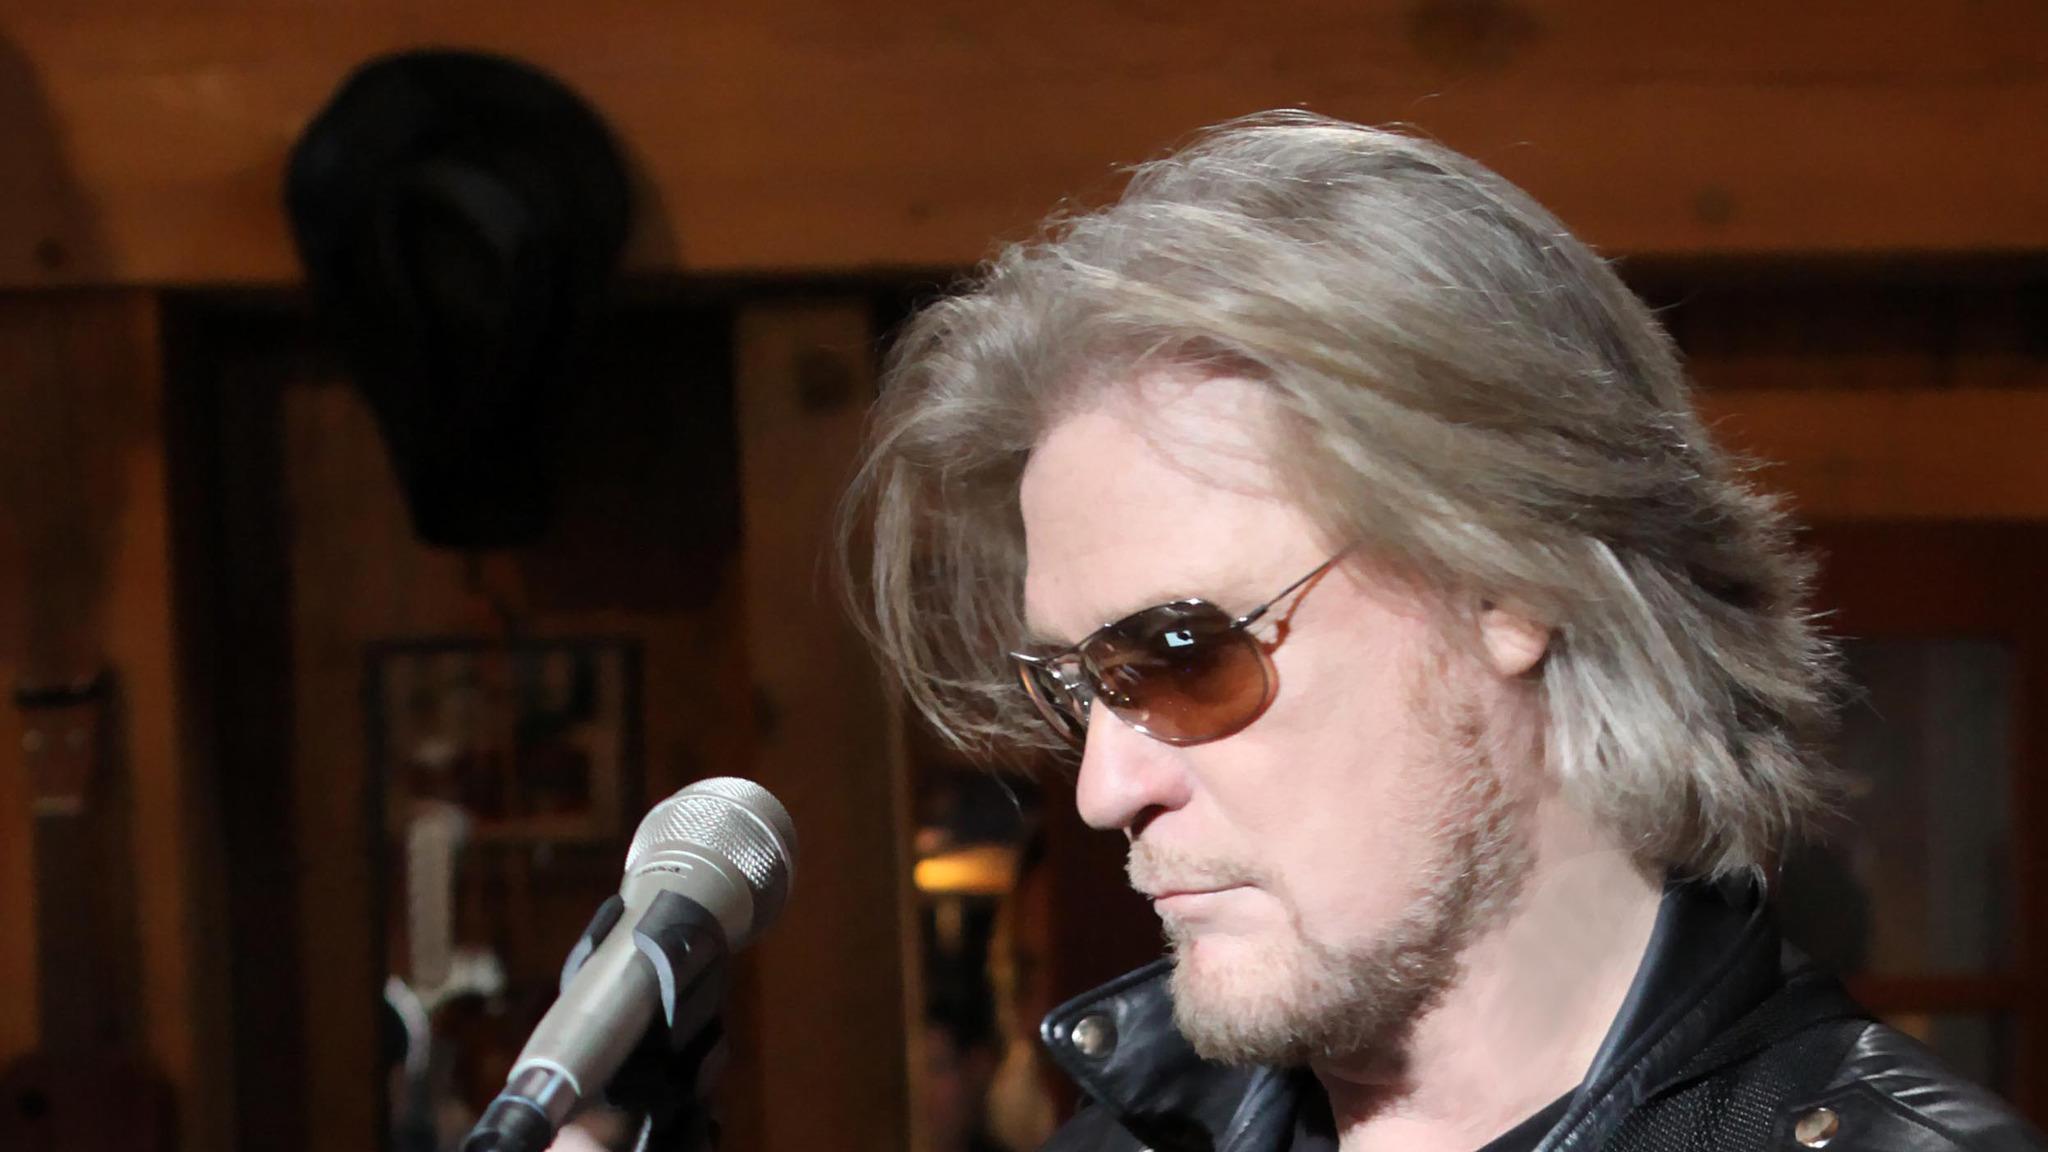 Daryl Hall and the Daryl's House Band with Special Guest Todd Rundgren presale password for advance tickets in St. Louis